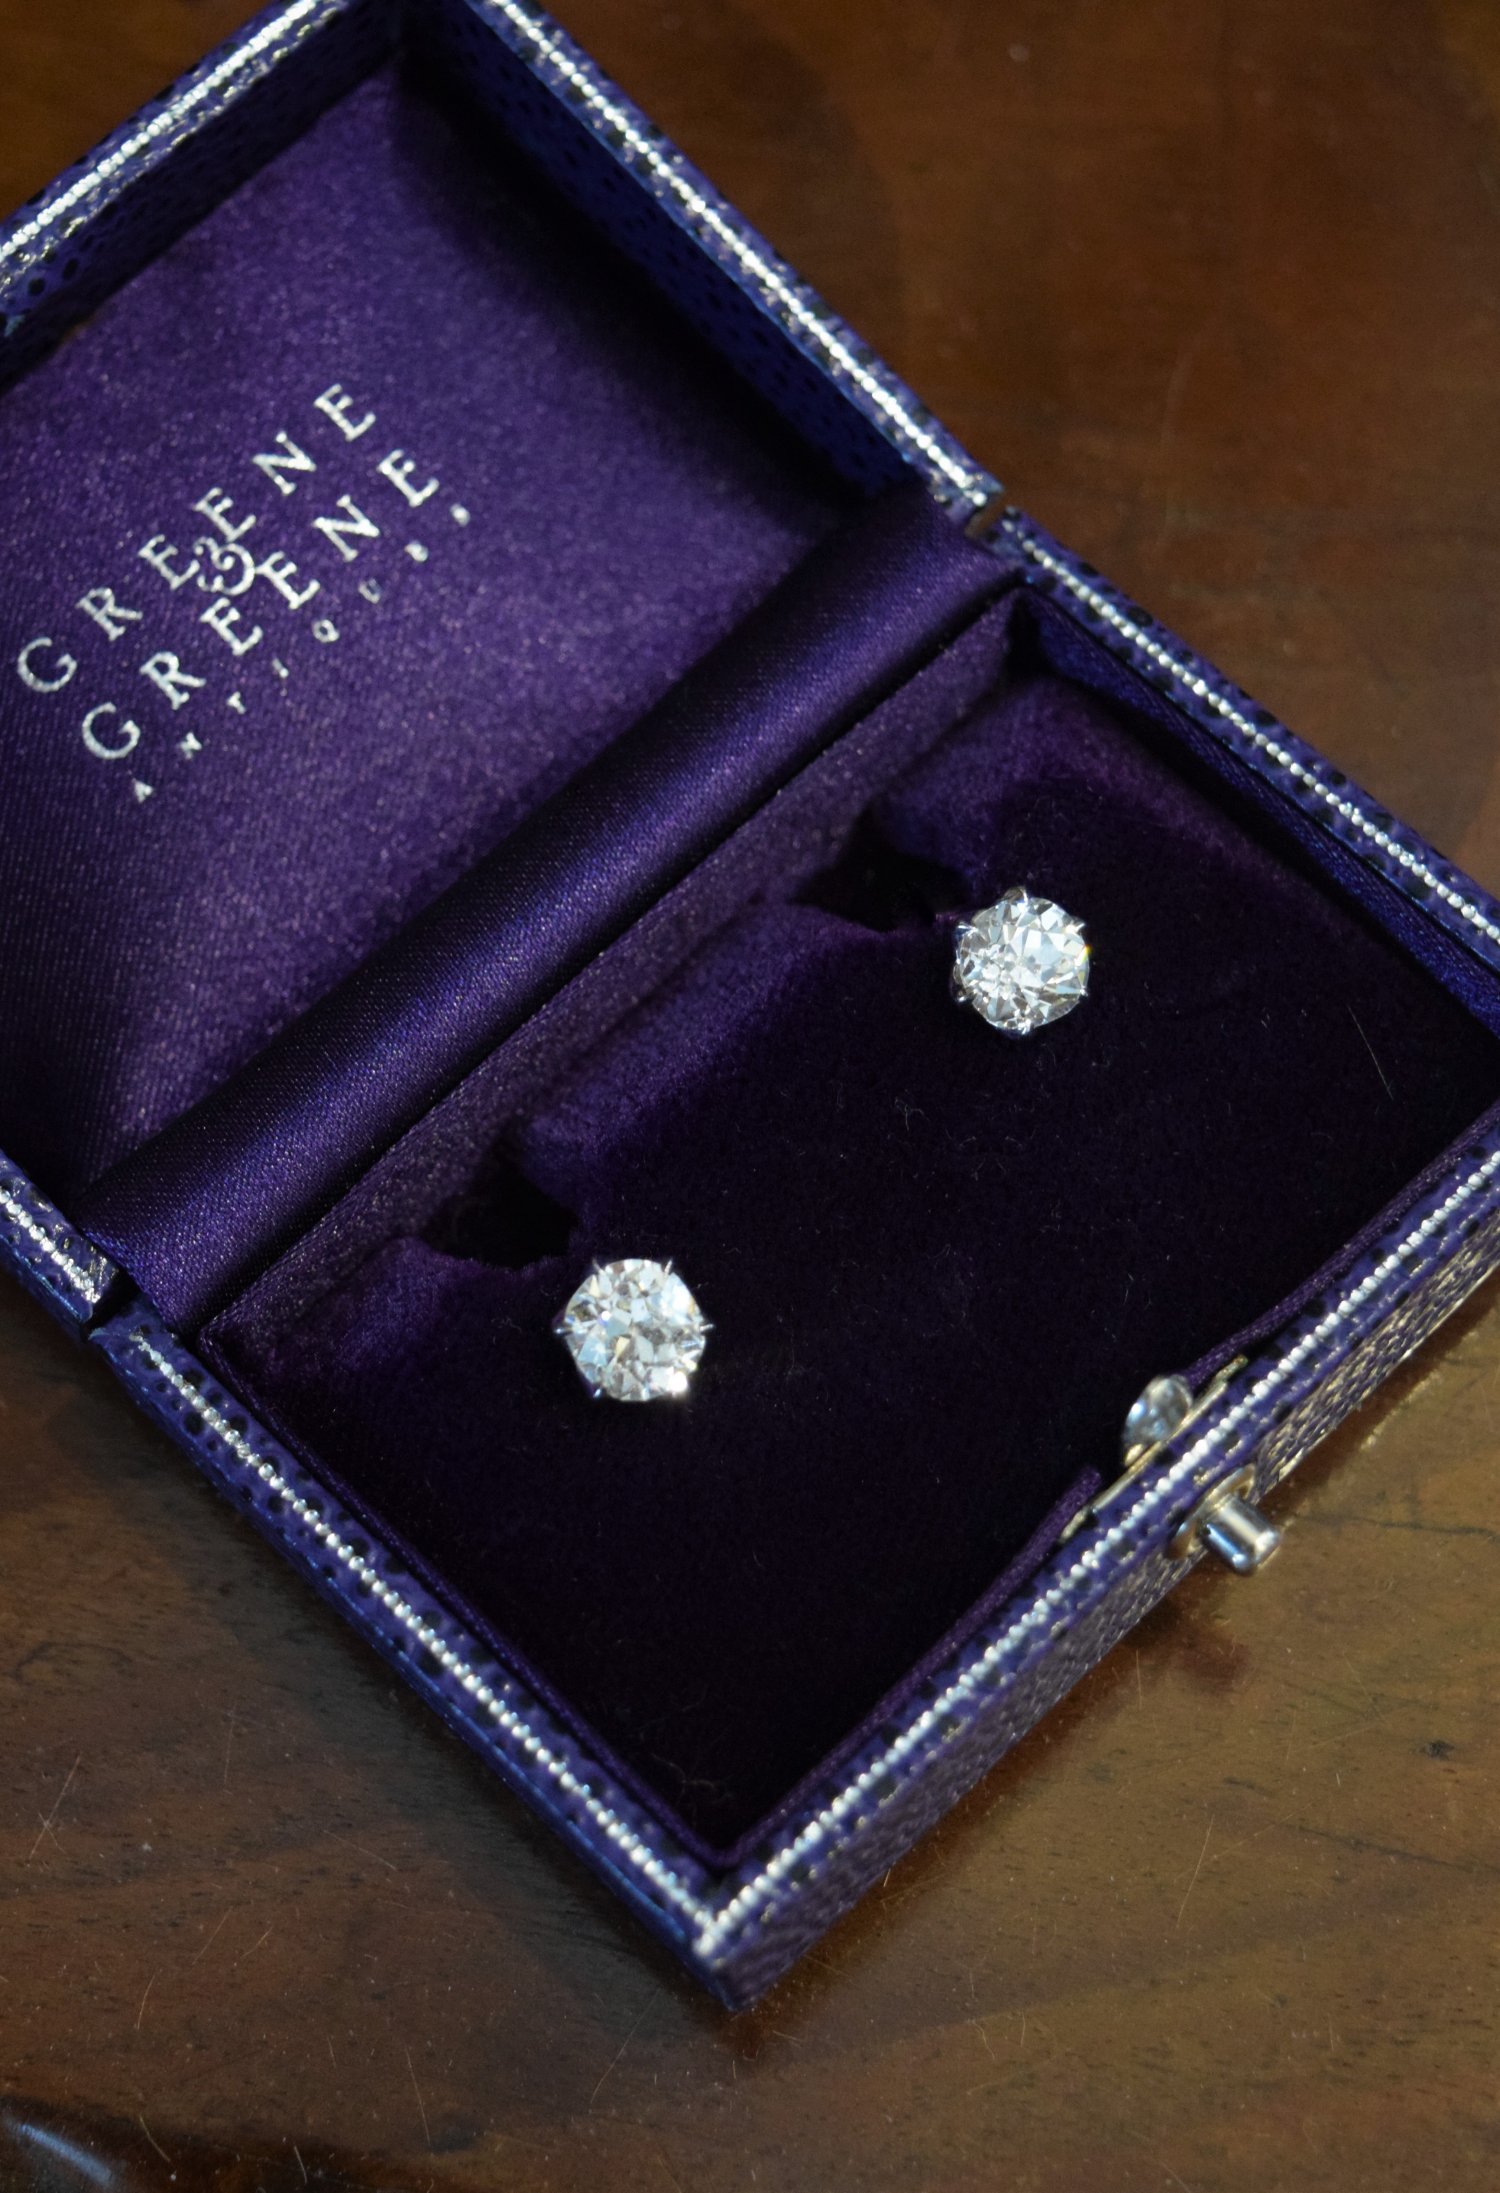 Pair of Russian old mine cut diamonds and platinum earrings